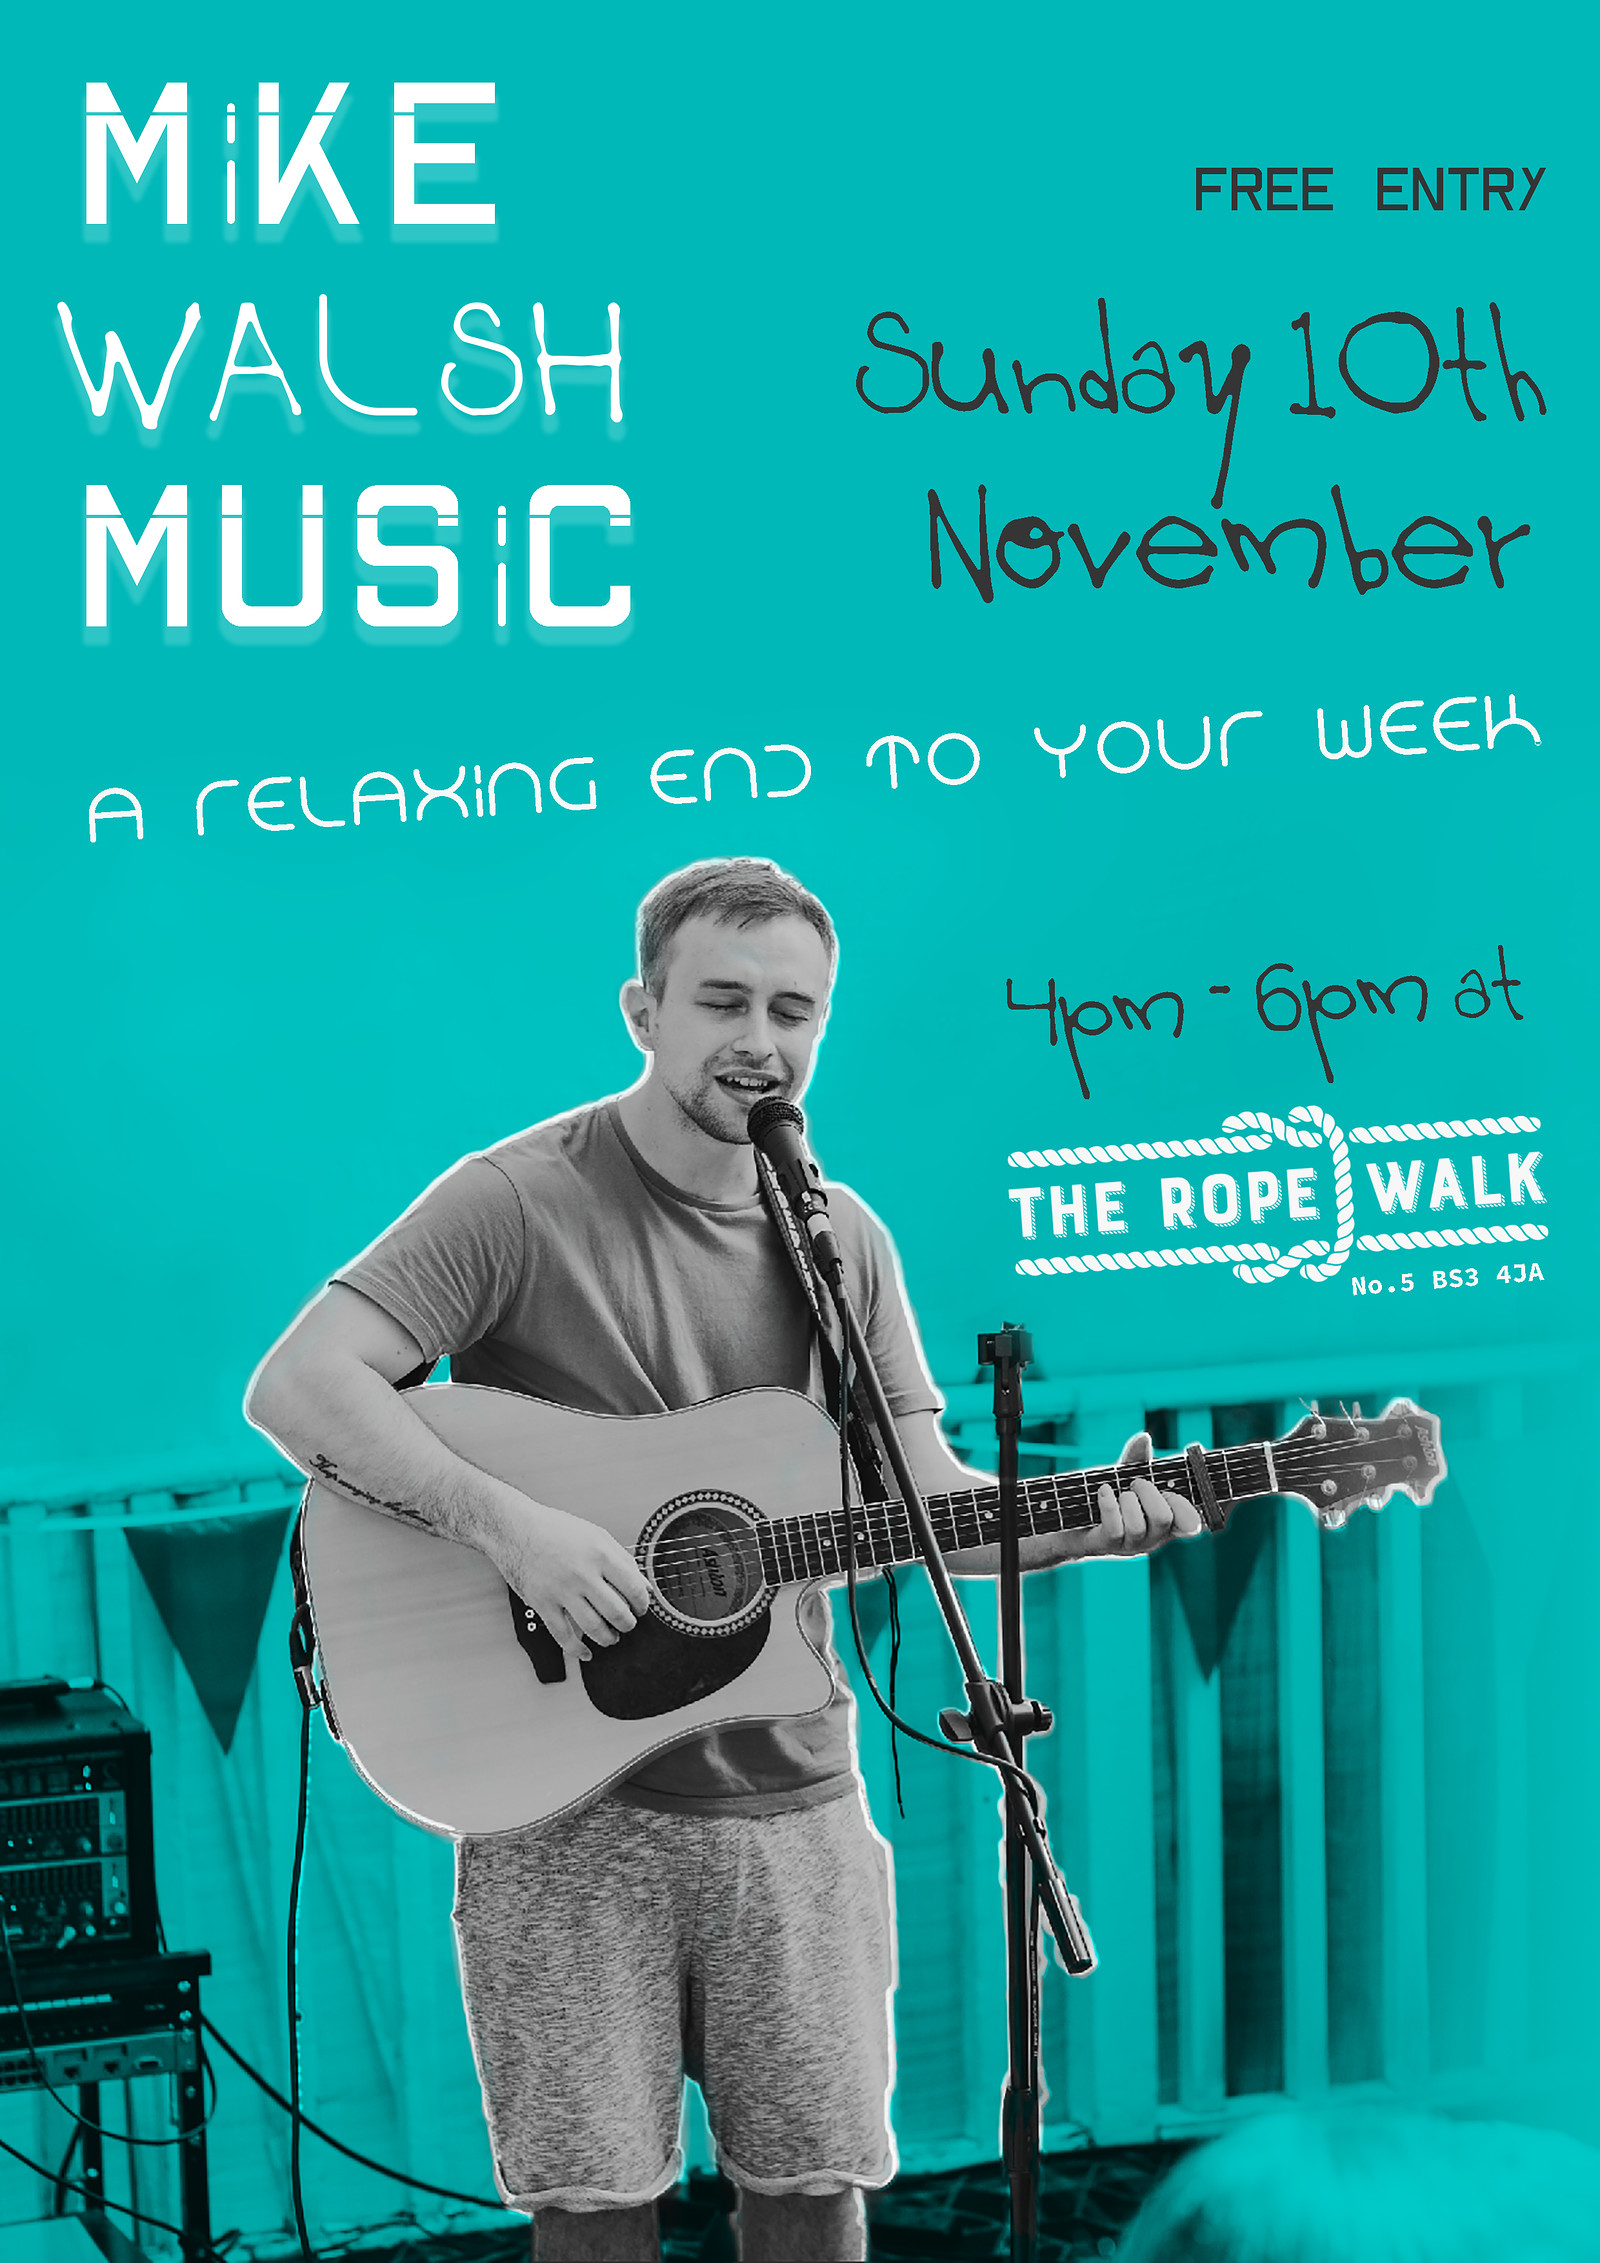 Sunday at The Rope Walk with Mike Walsh at The Rope Walk